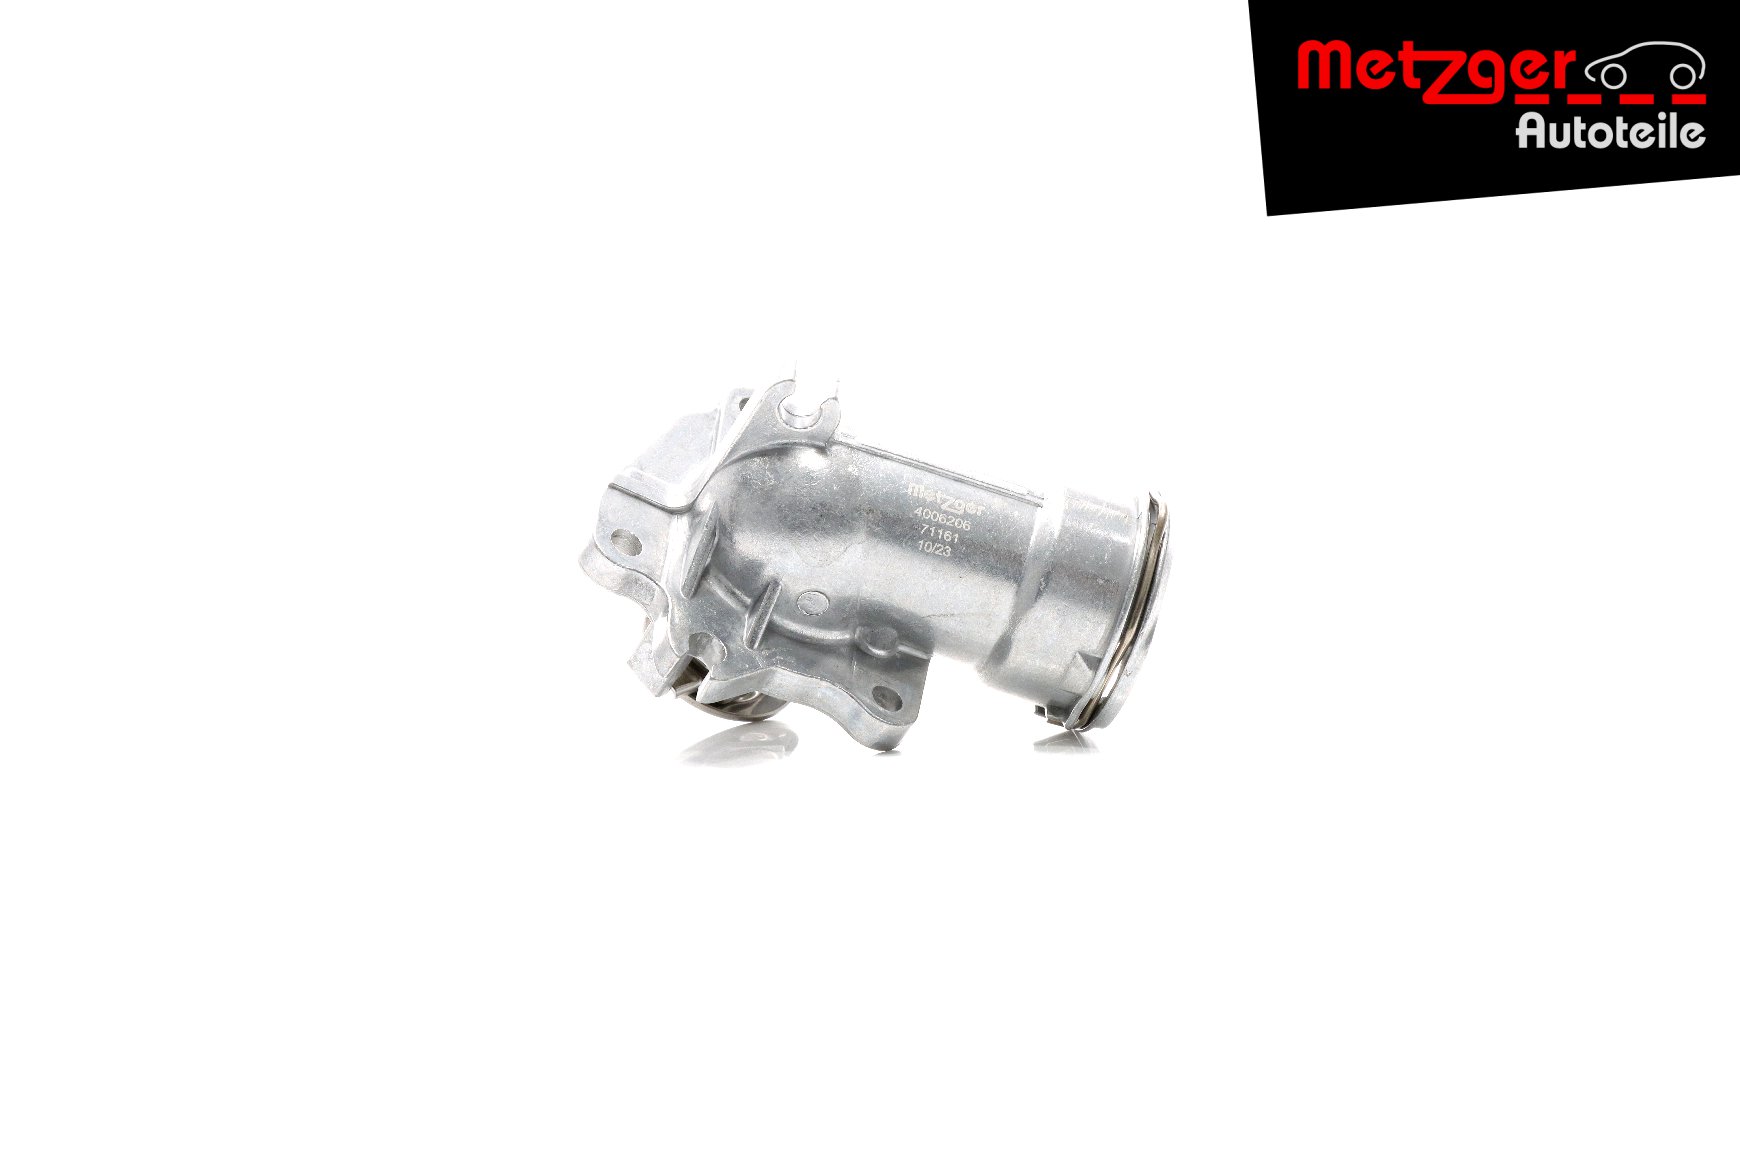 METZGER 4006206 Engine thermostat A642 200 02 15